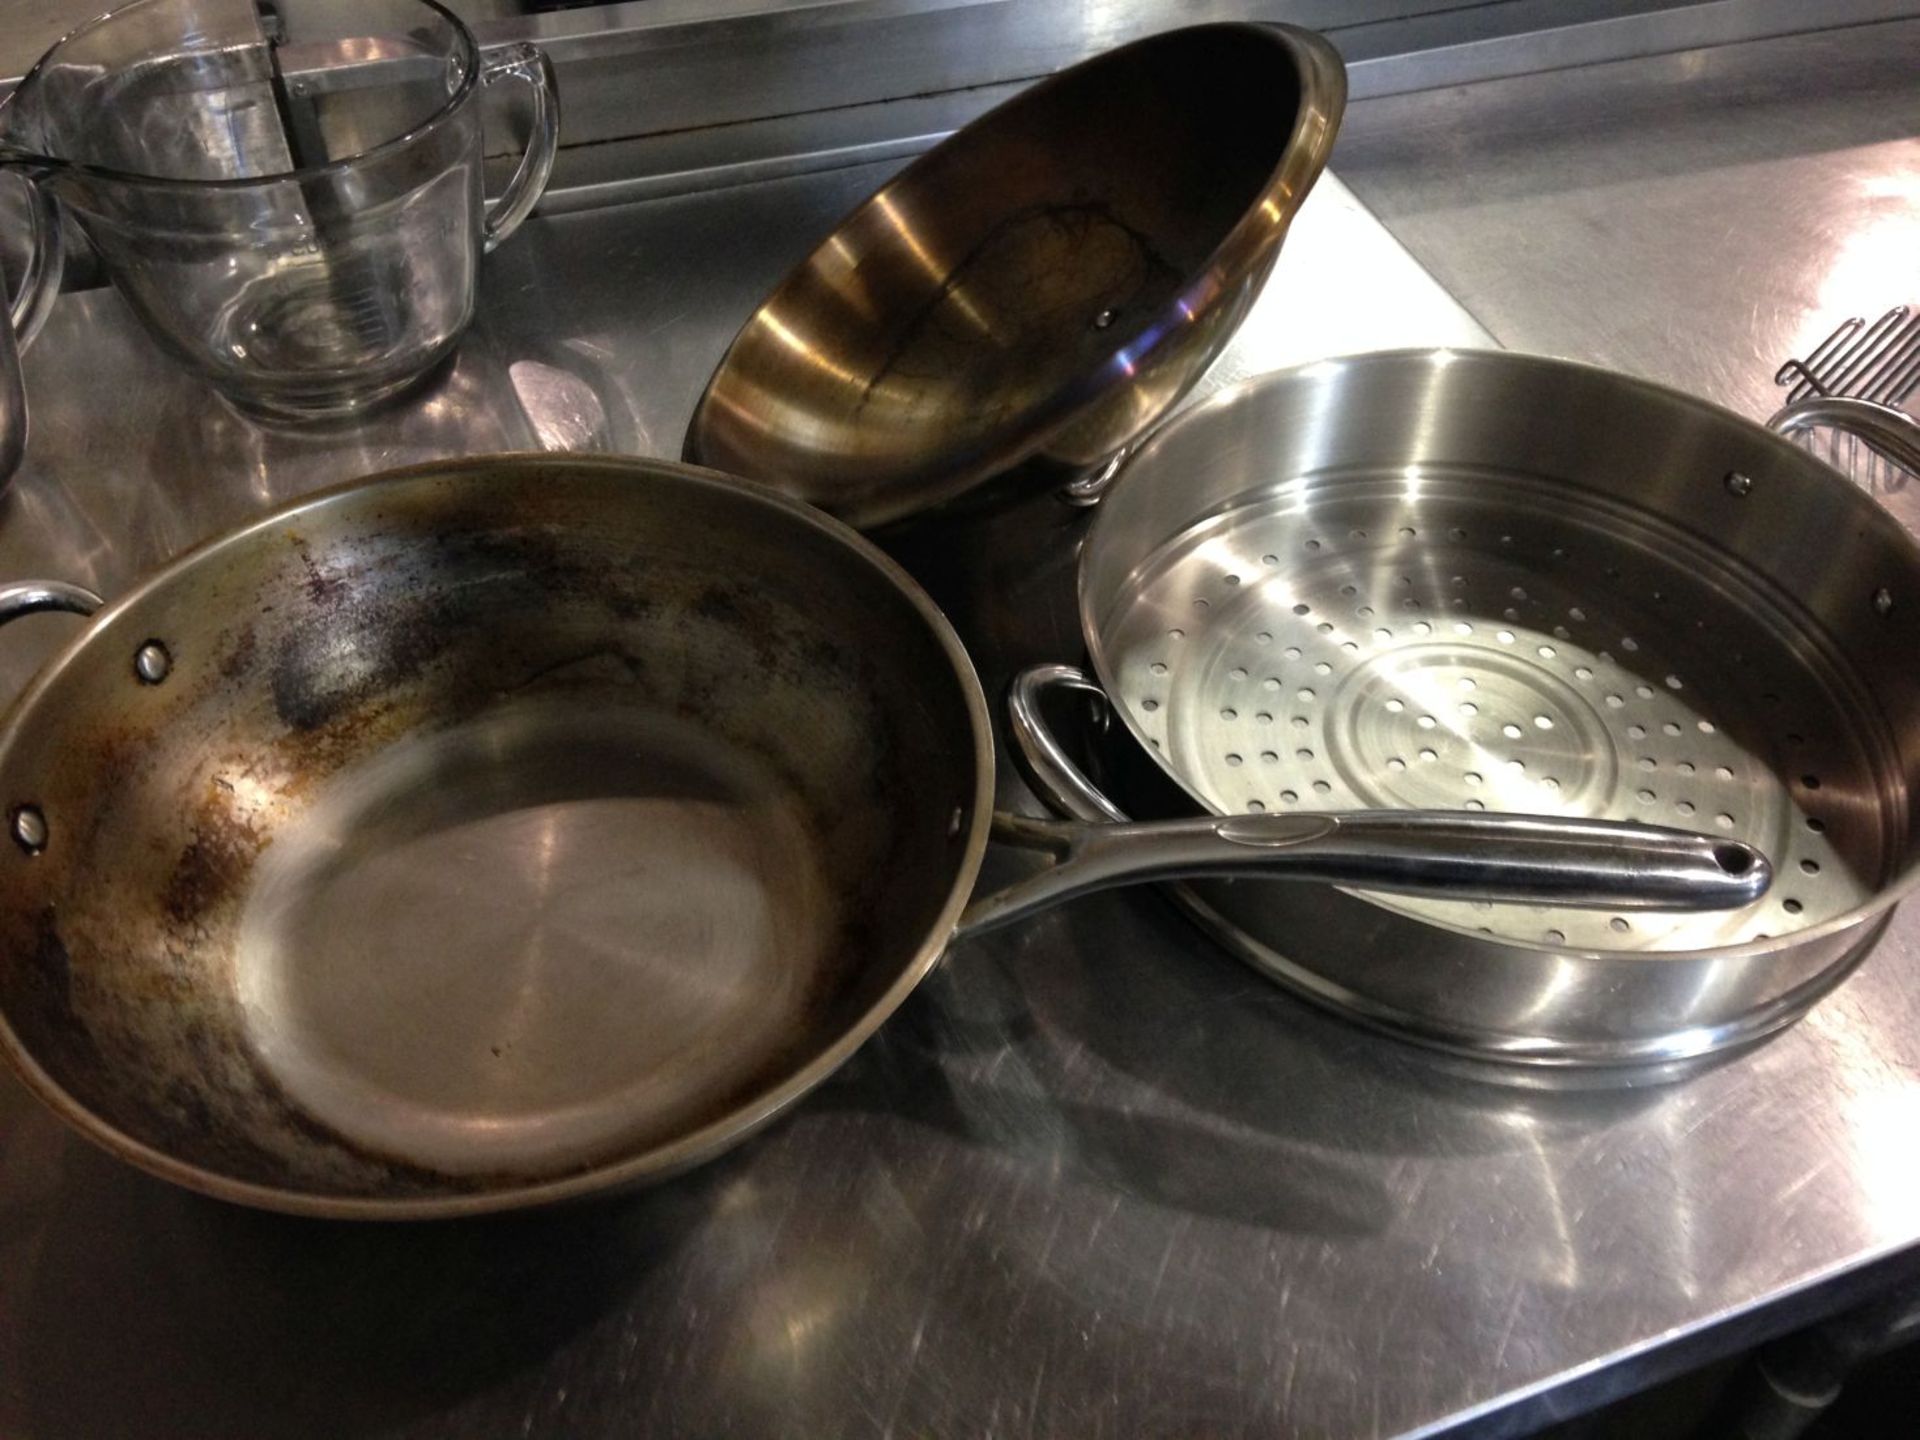 Stainless Pan with Steamer Insert - Image 2 of 2